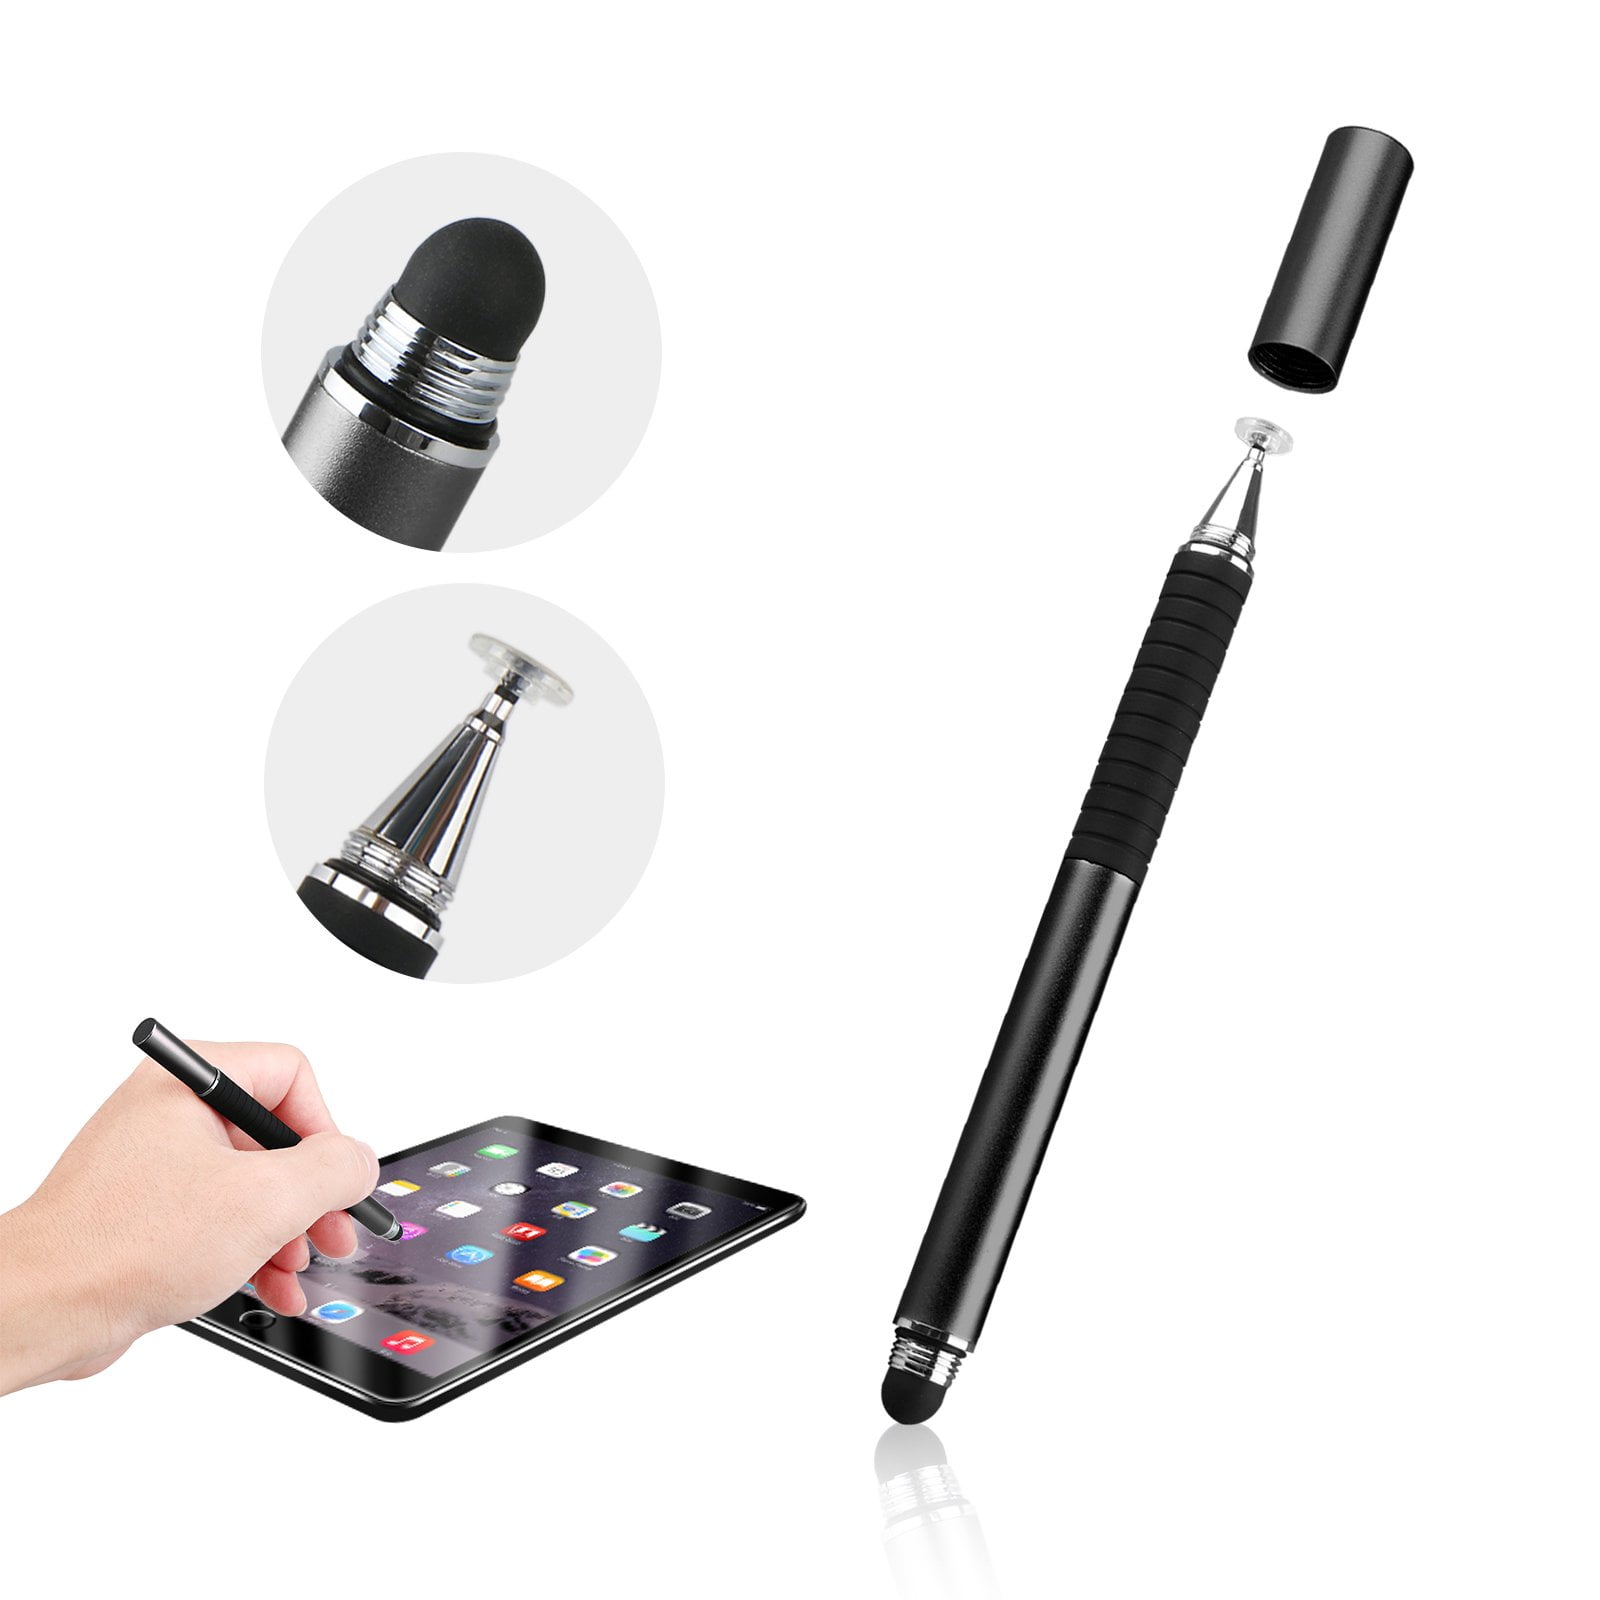 New Black 2 in 1 Touch Screen Pen Stylus fit iPhone iPad Samsung Tablet Phone US 